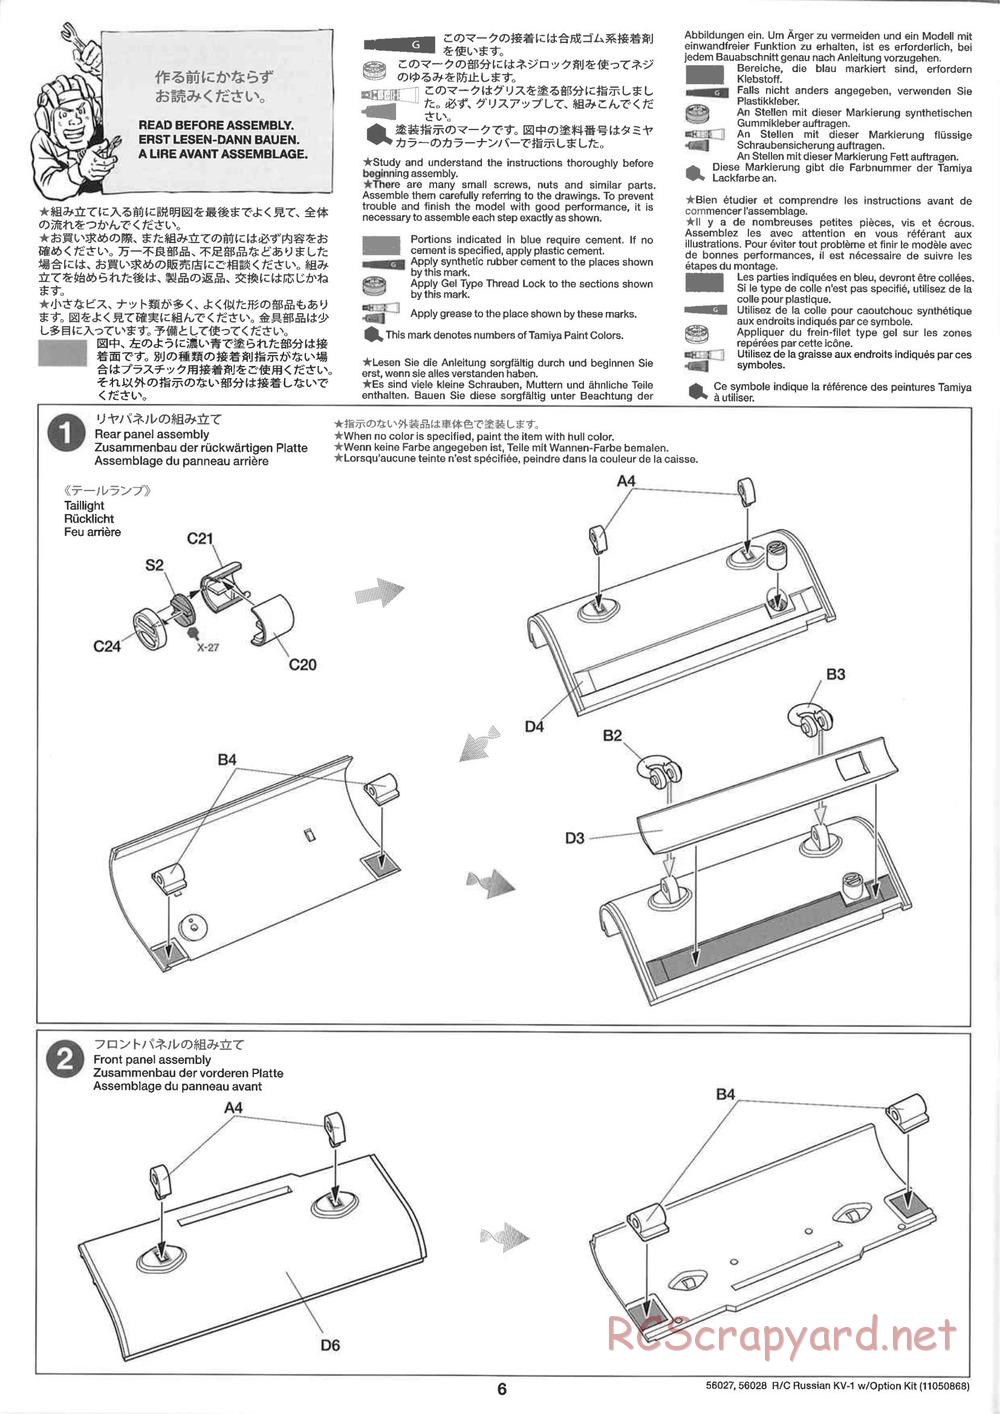 Tamiya - Russian Heavy Tank KV-1 - 1/16 Scale Chassis - Manual - Page 6